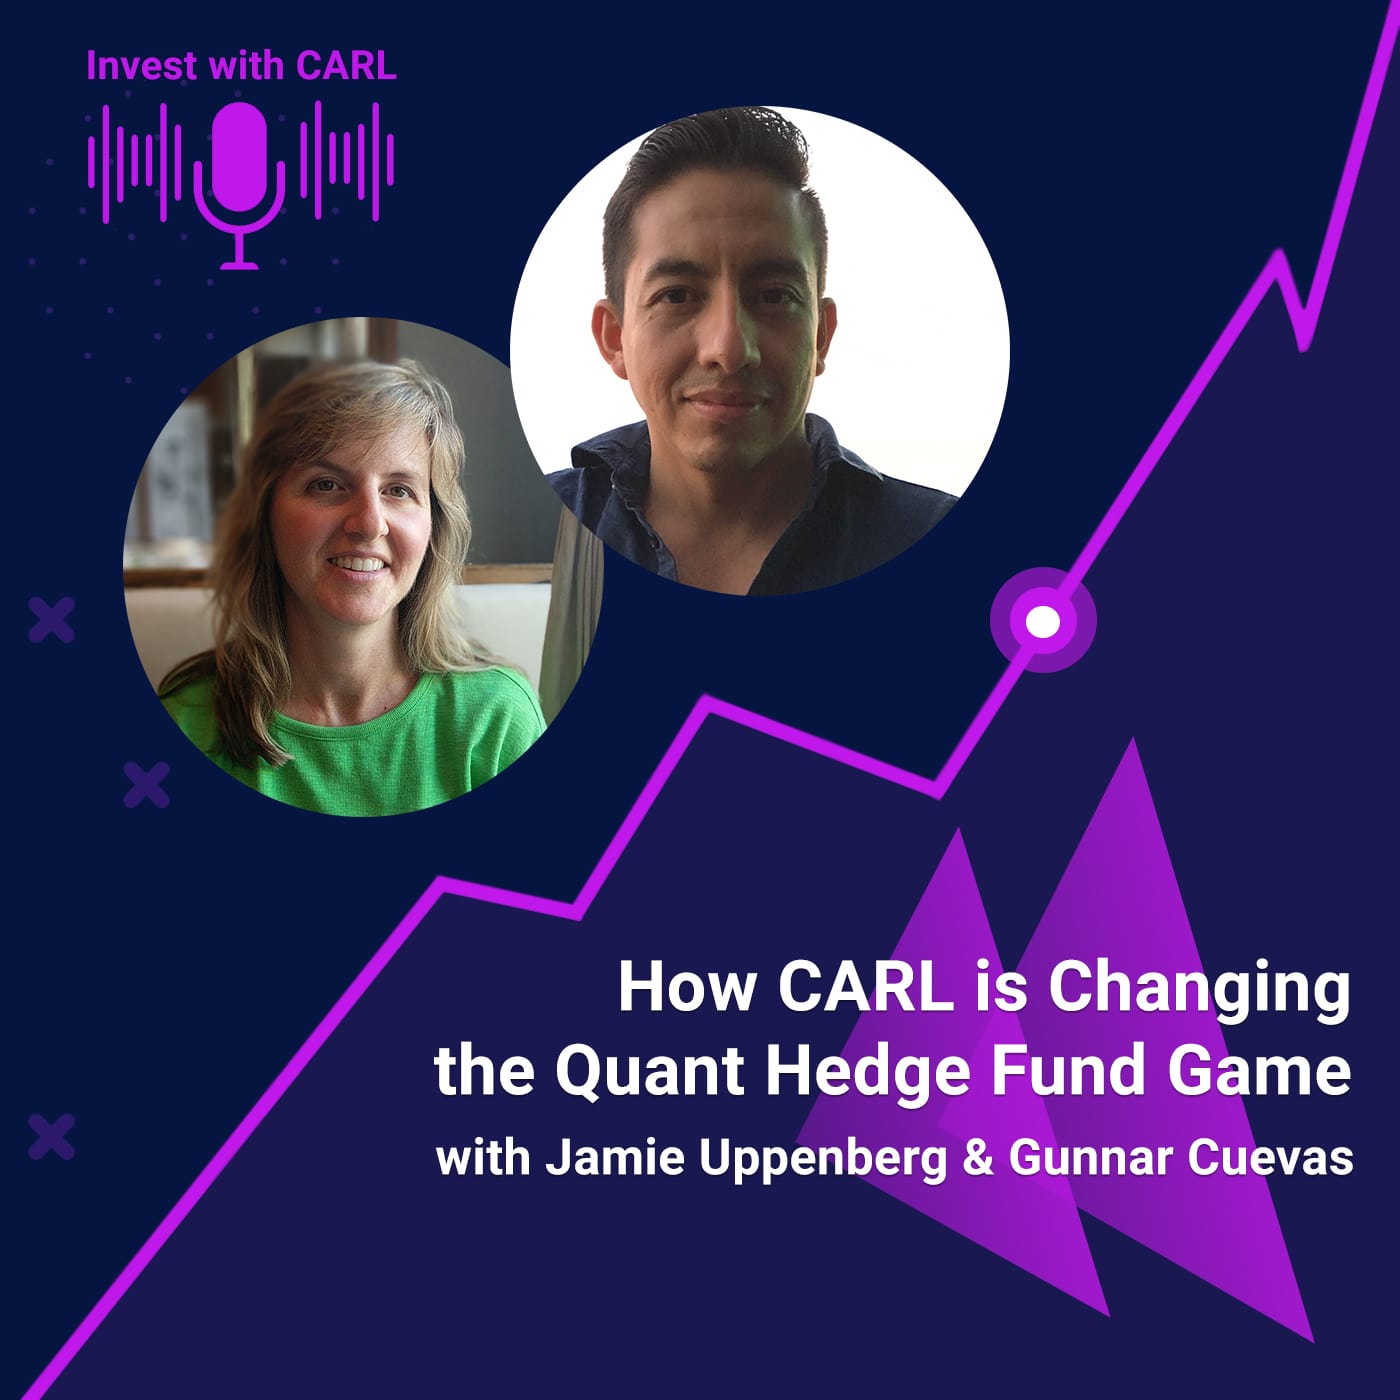 How CARL is Changing the Quant Hedge Fund Game